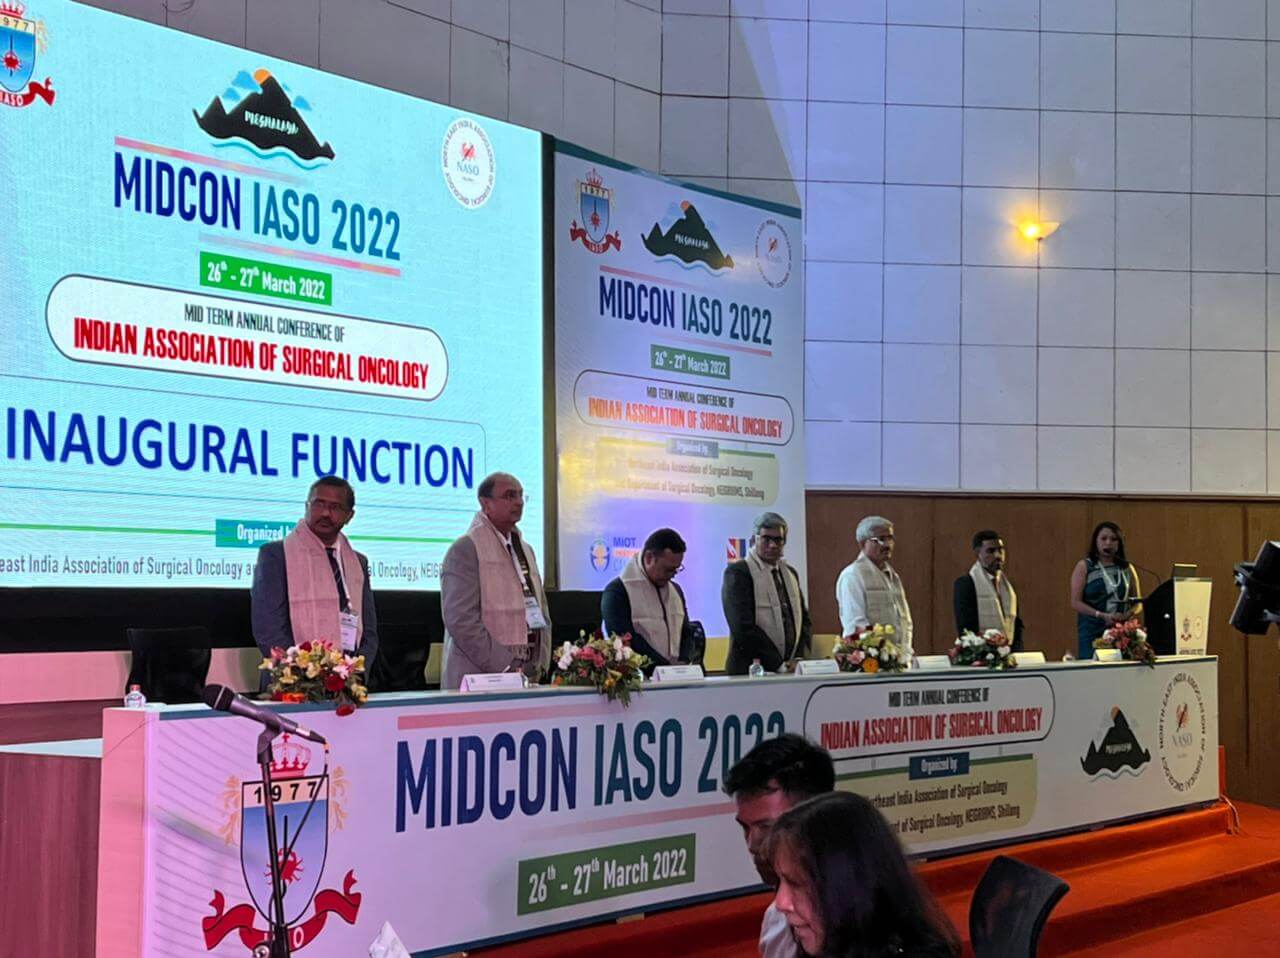 MID-TERM-ANNUAL-CONFERENCE-OF-INDIAN-ASSOCIATION-OF-SURGICAL-ONCOLOGY-2022-10